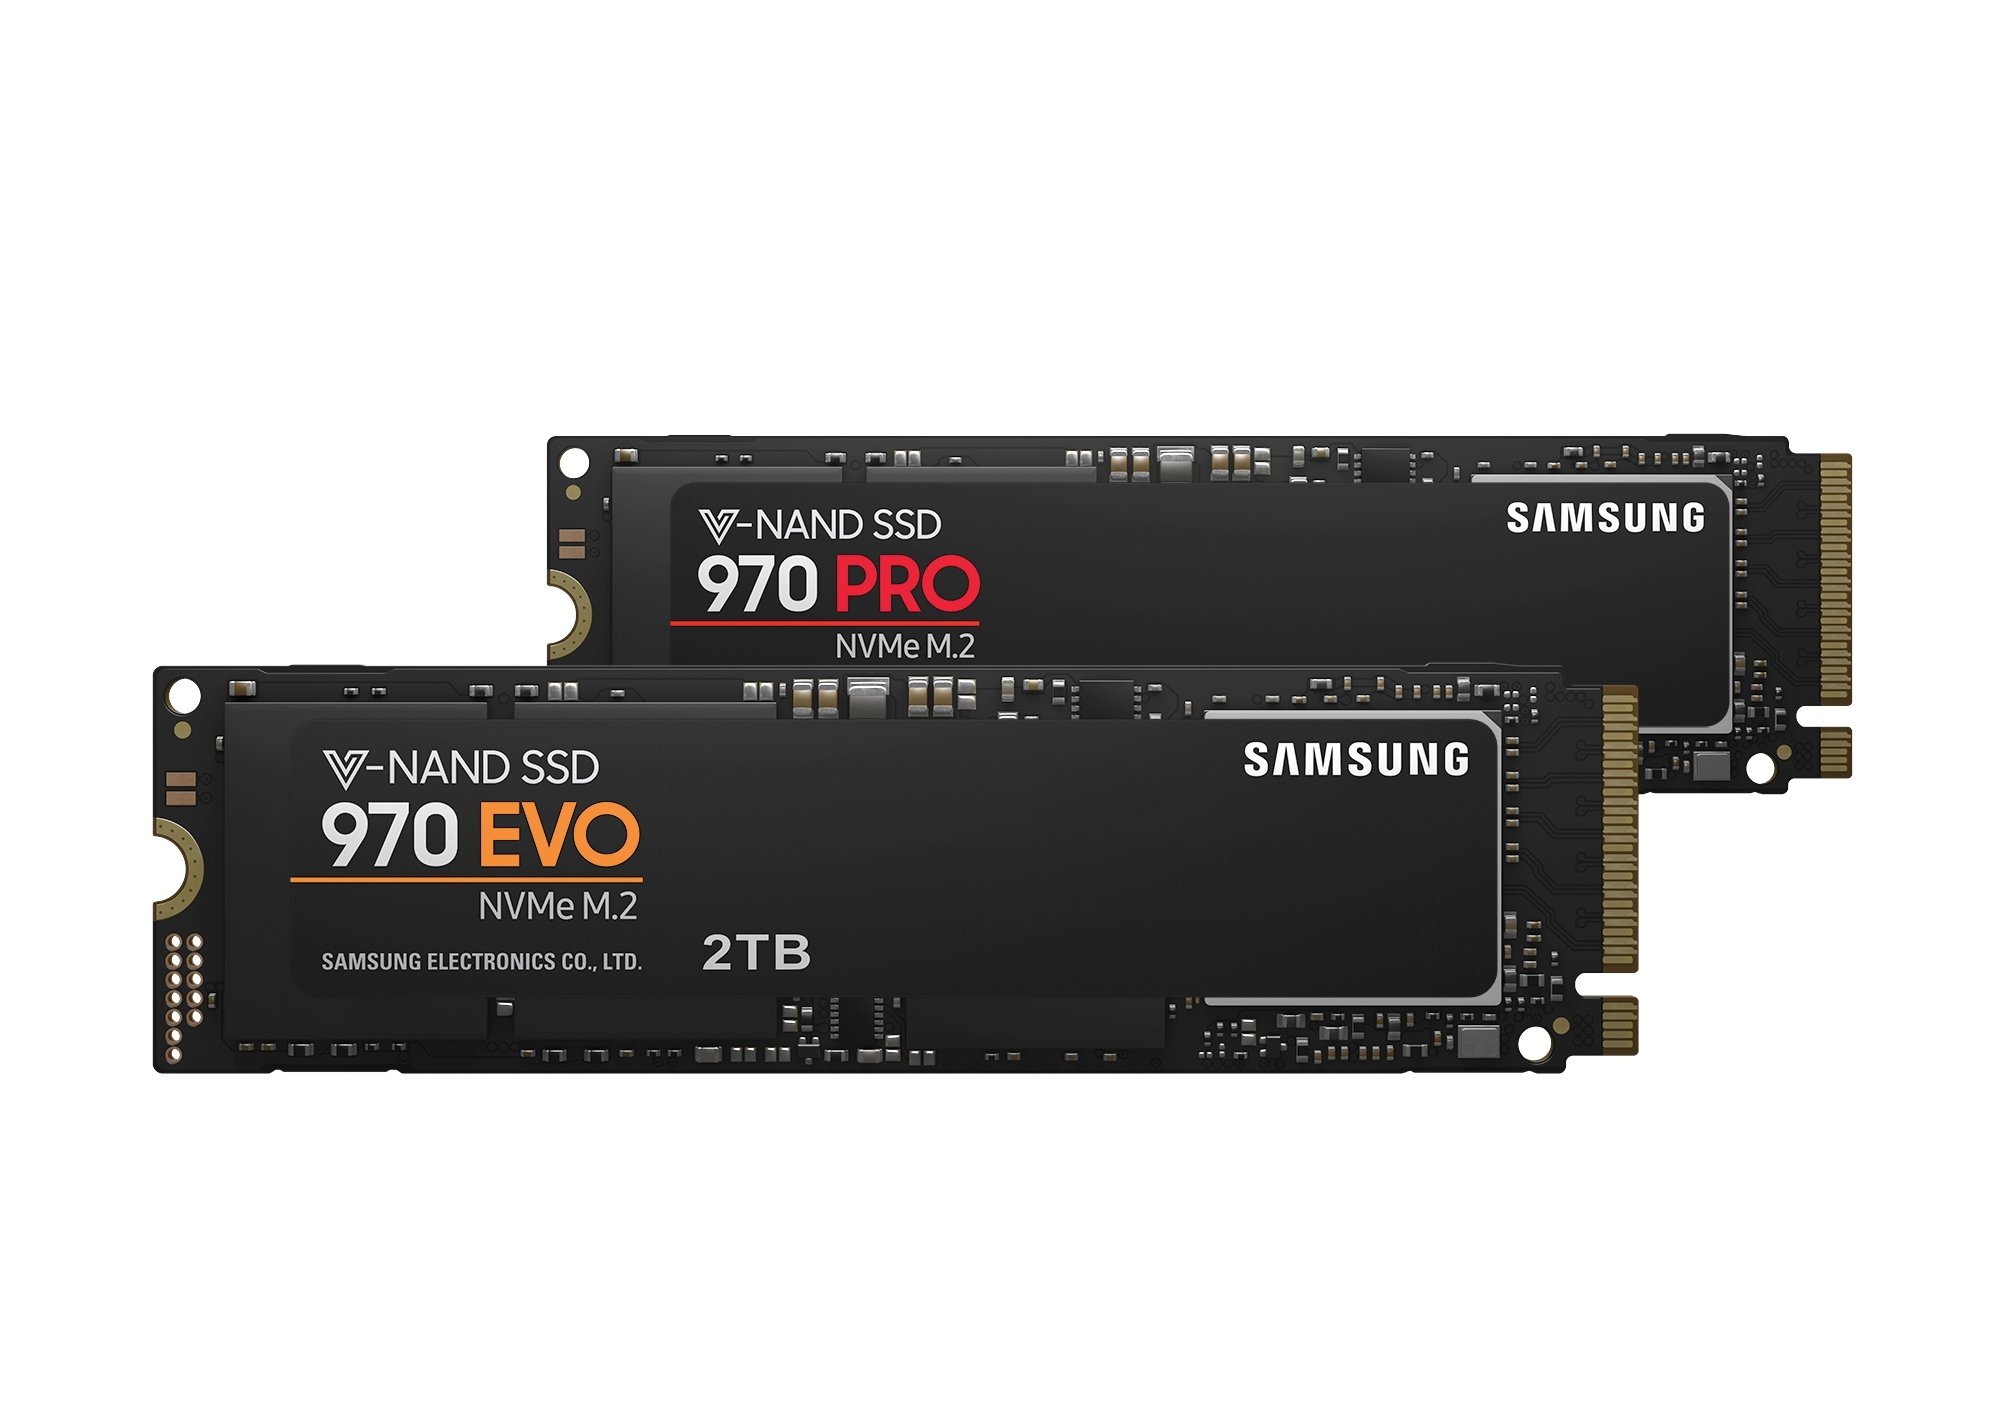 Samsung launches speedy new 970 series NVMe SSDs